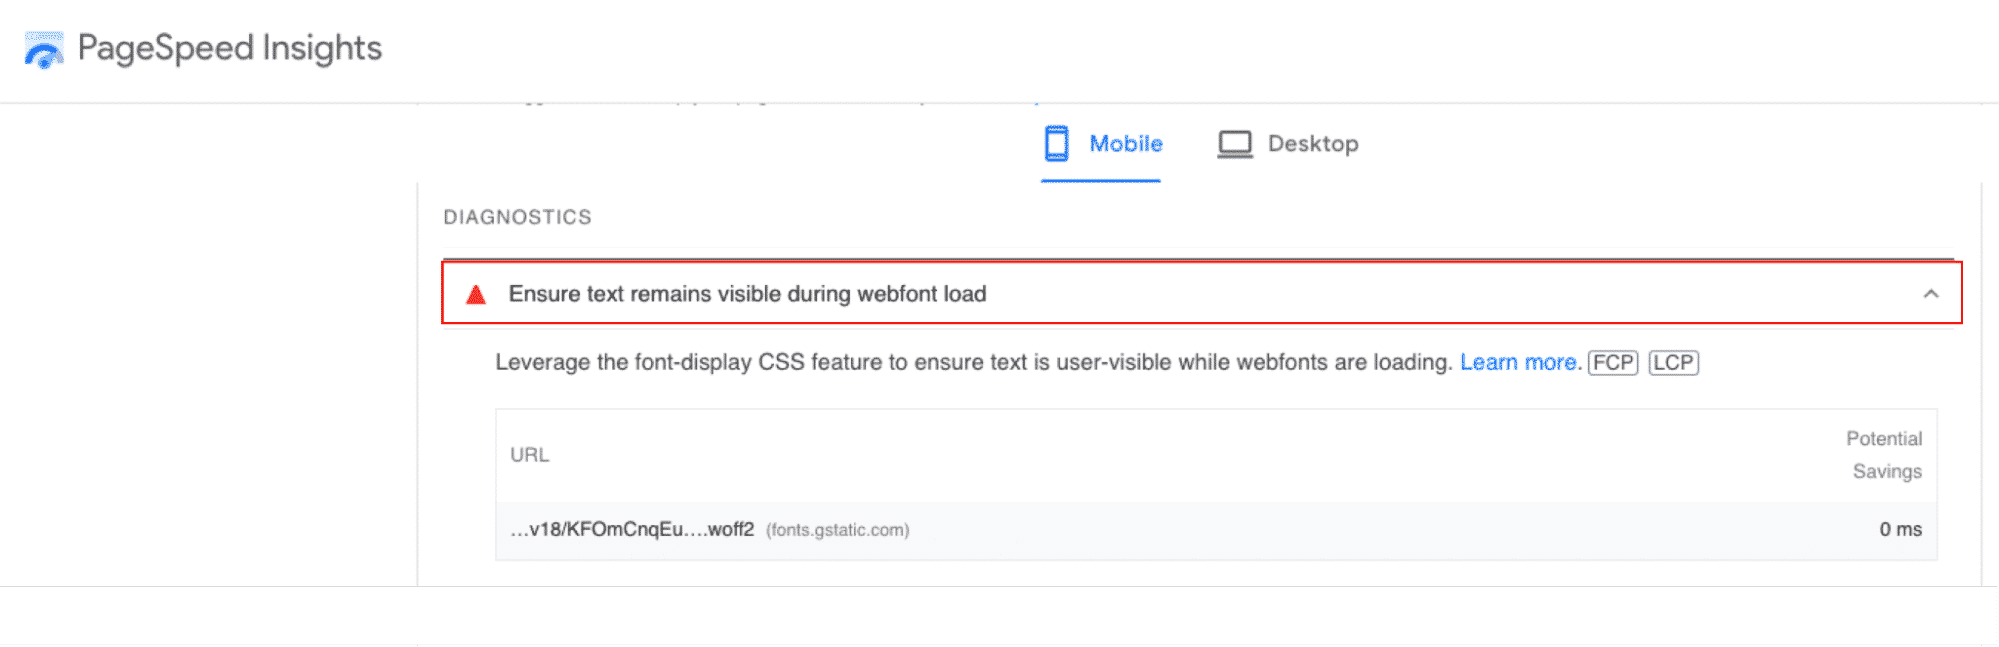 “Ensure text remains visible during webfont load” warning - Source: PageSpeed Insights
